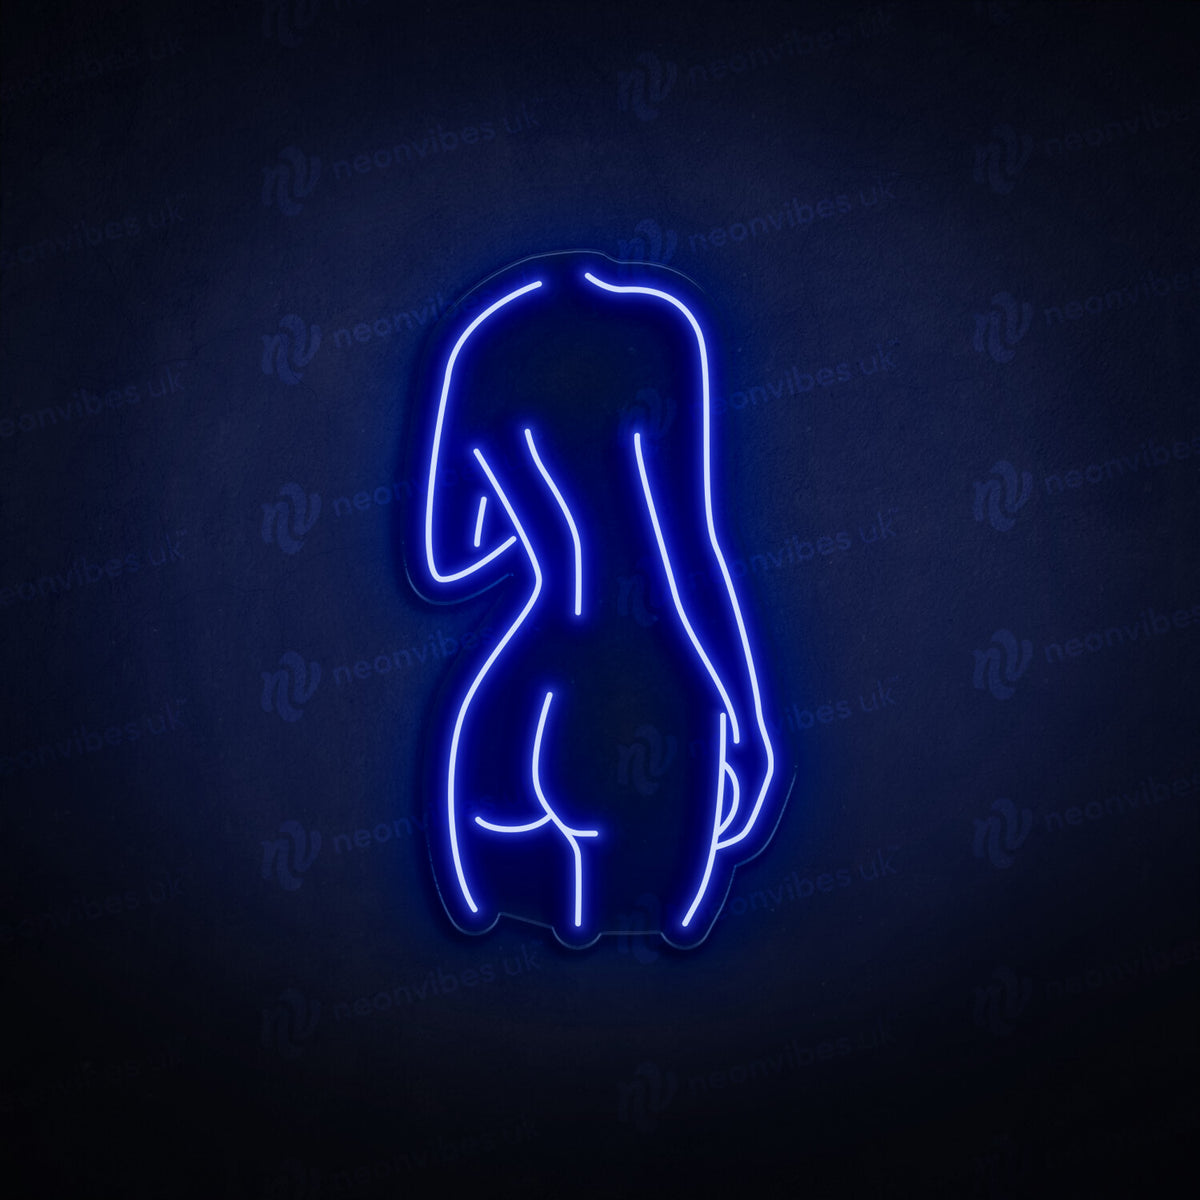 Lady neon sign